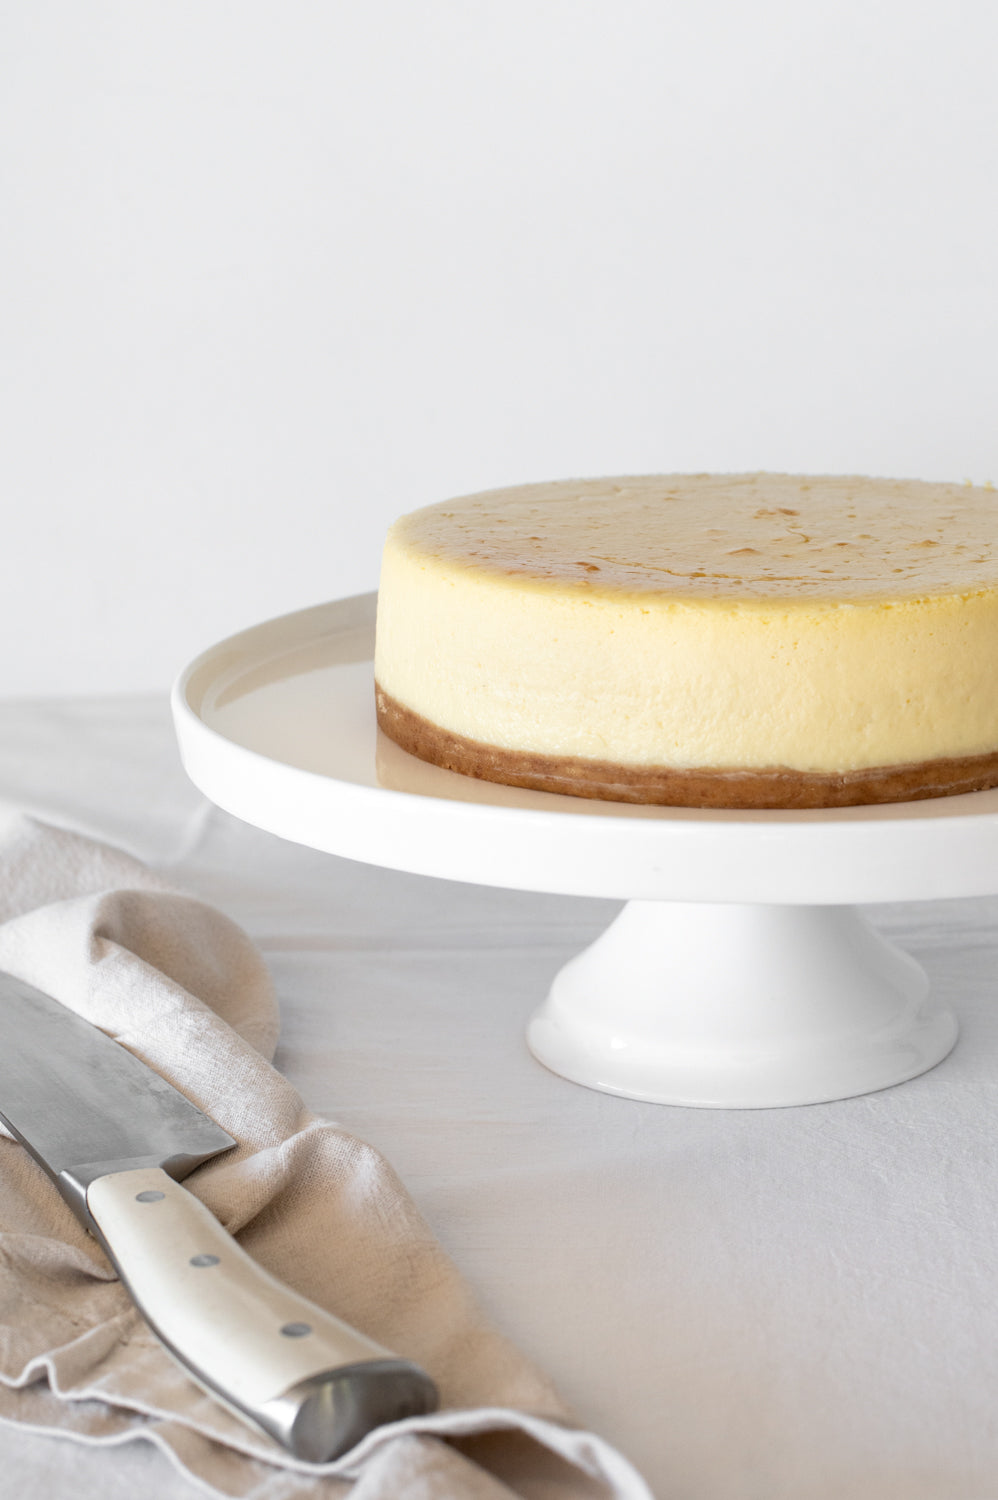 Plain Baked Cheesecake on a cake stand